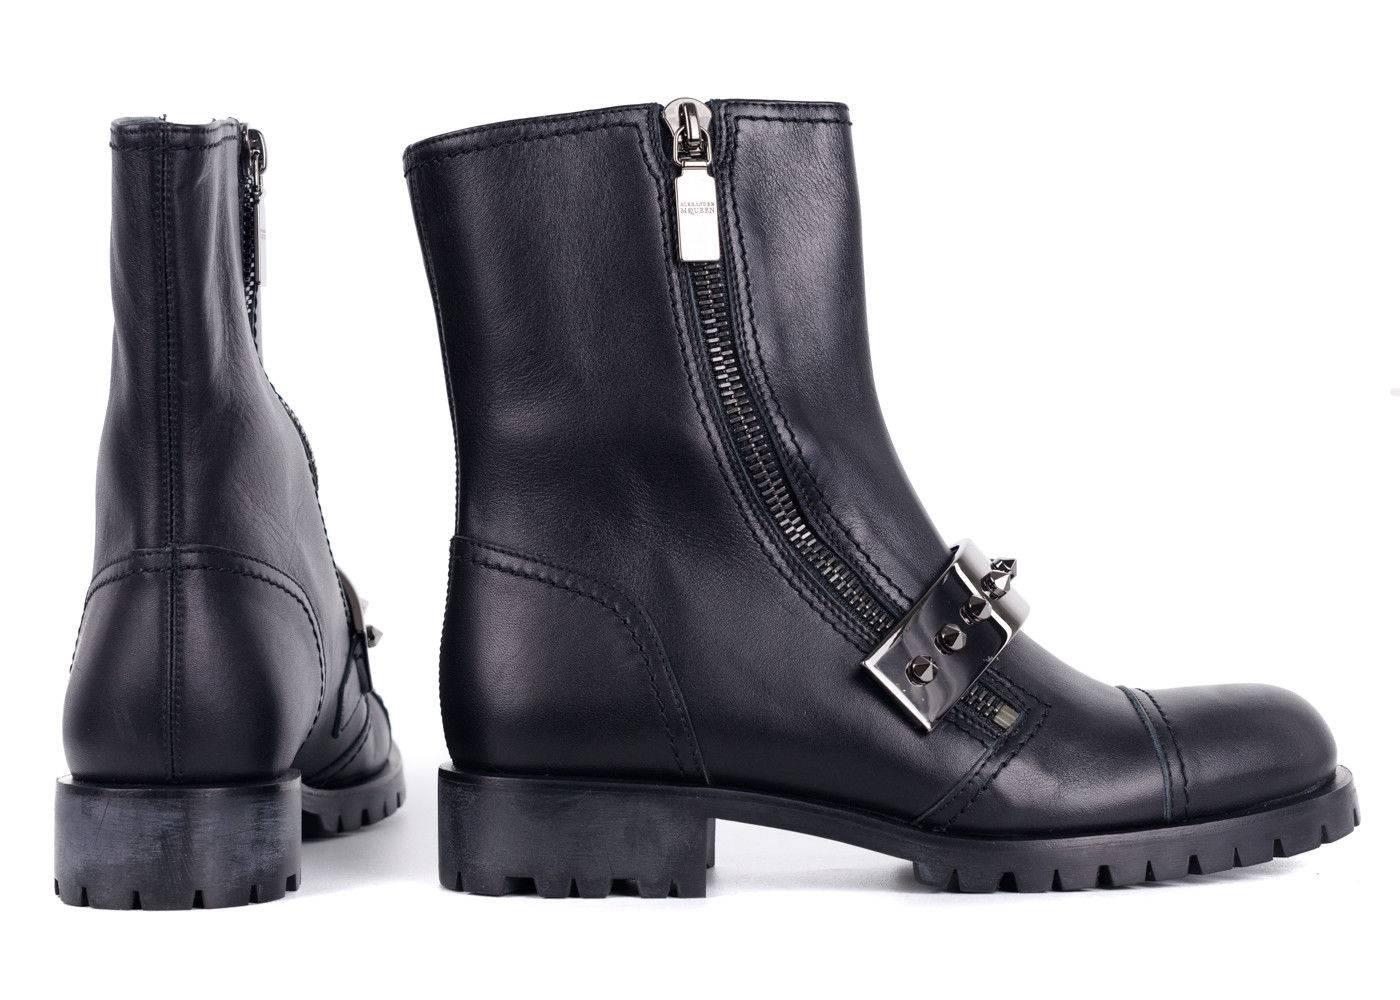 Alexander McQueen Womens Black Metal Strap Combat Boots In New Condition For Sale In Brooklyn, NY